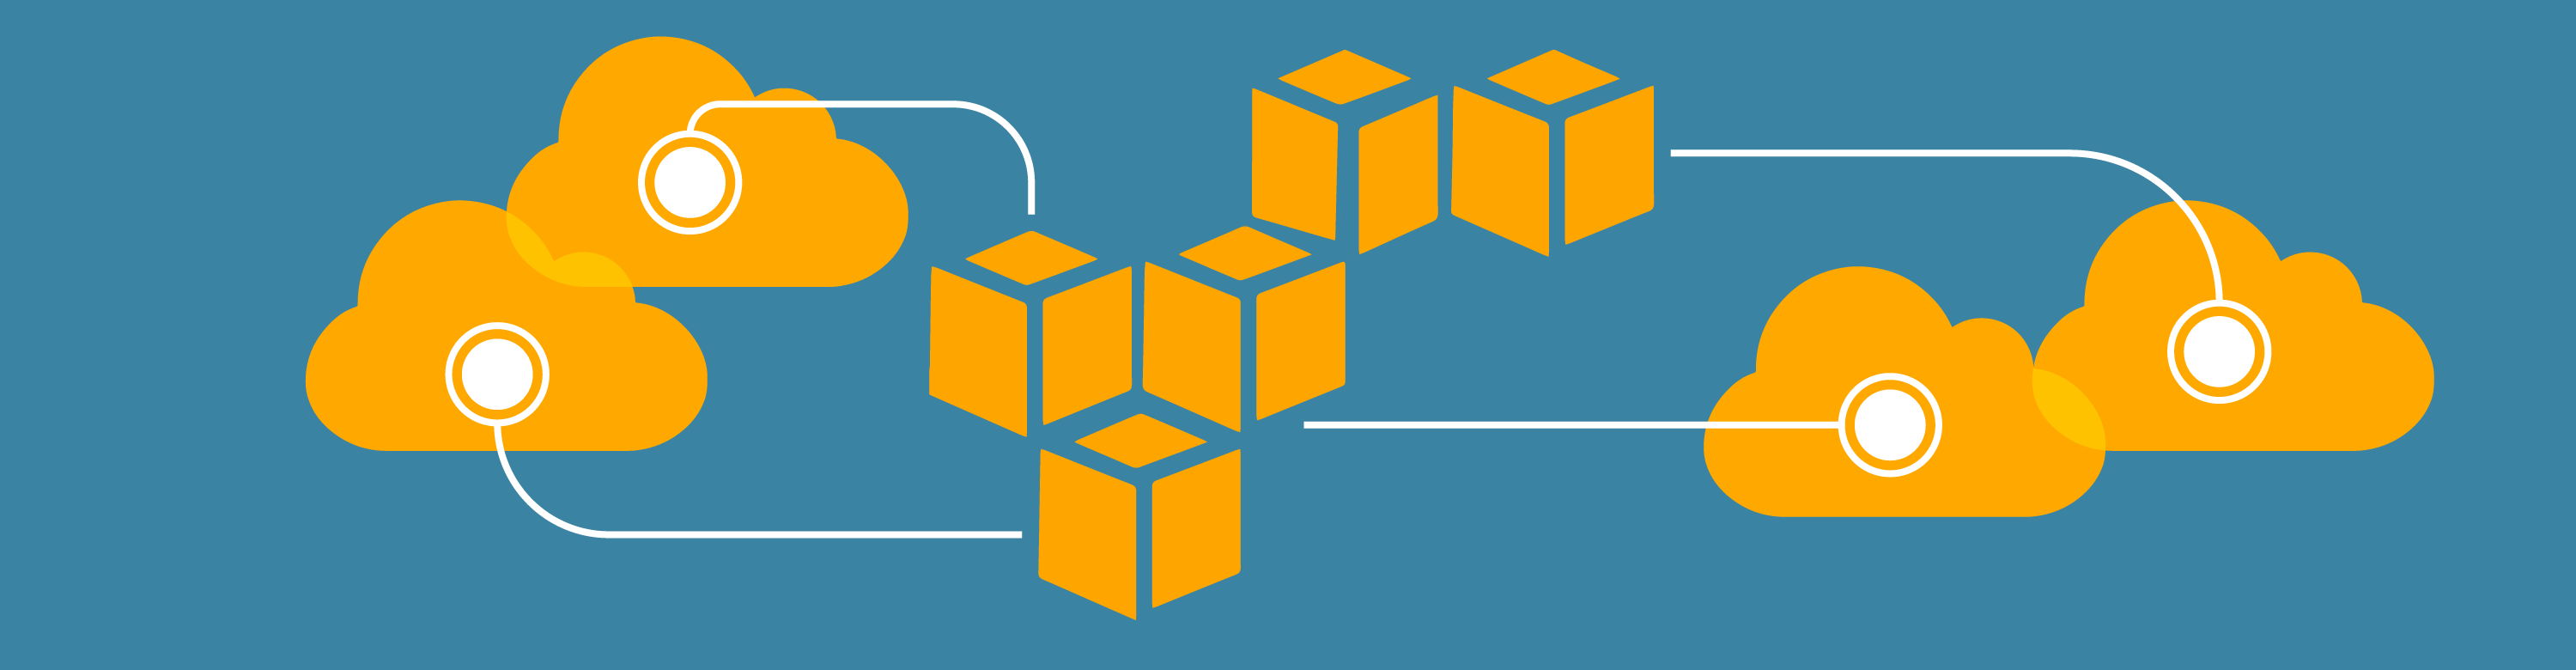 How to setup AWS SES mail relay on WHM/Cpanel Exim - Cloudlaya